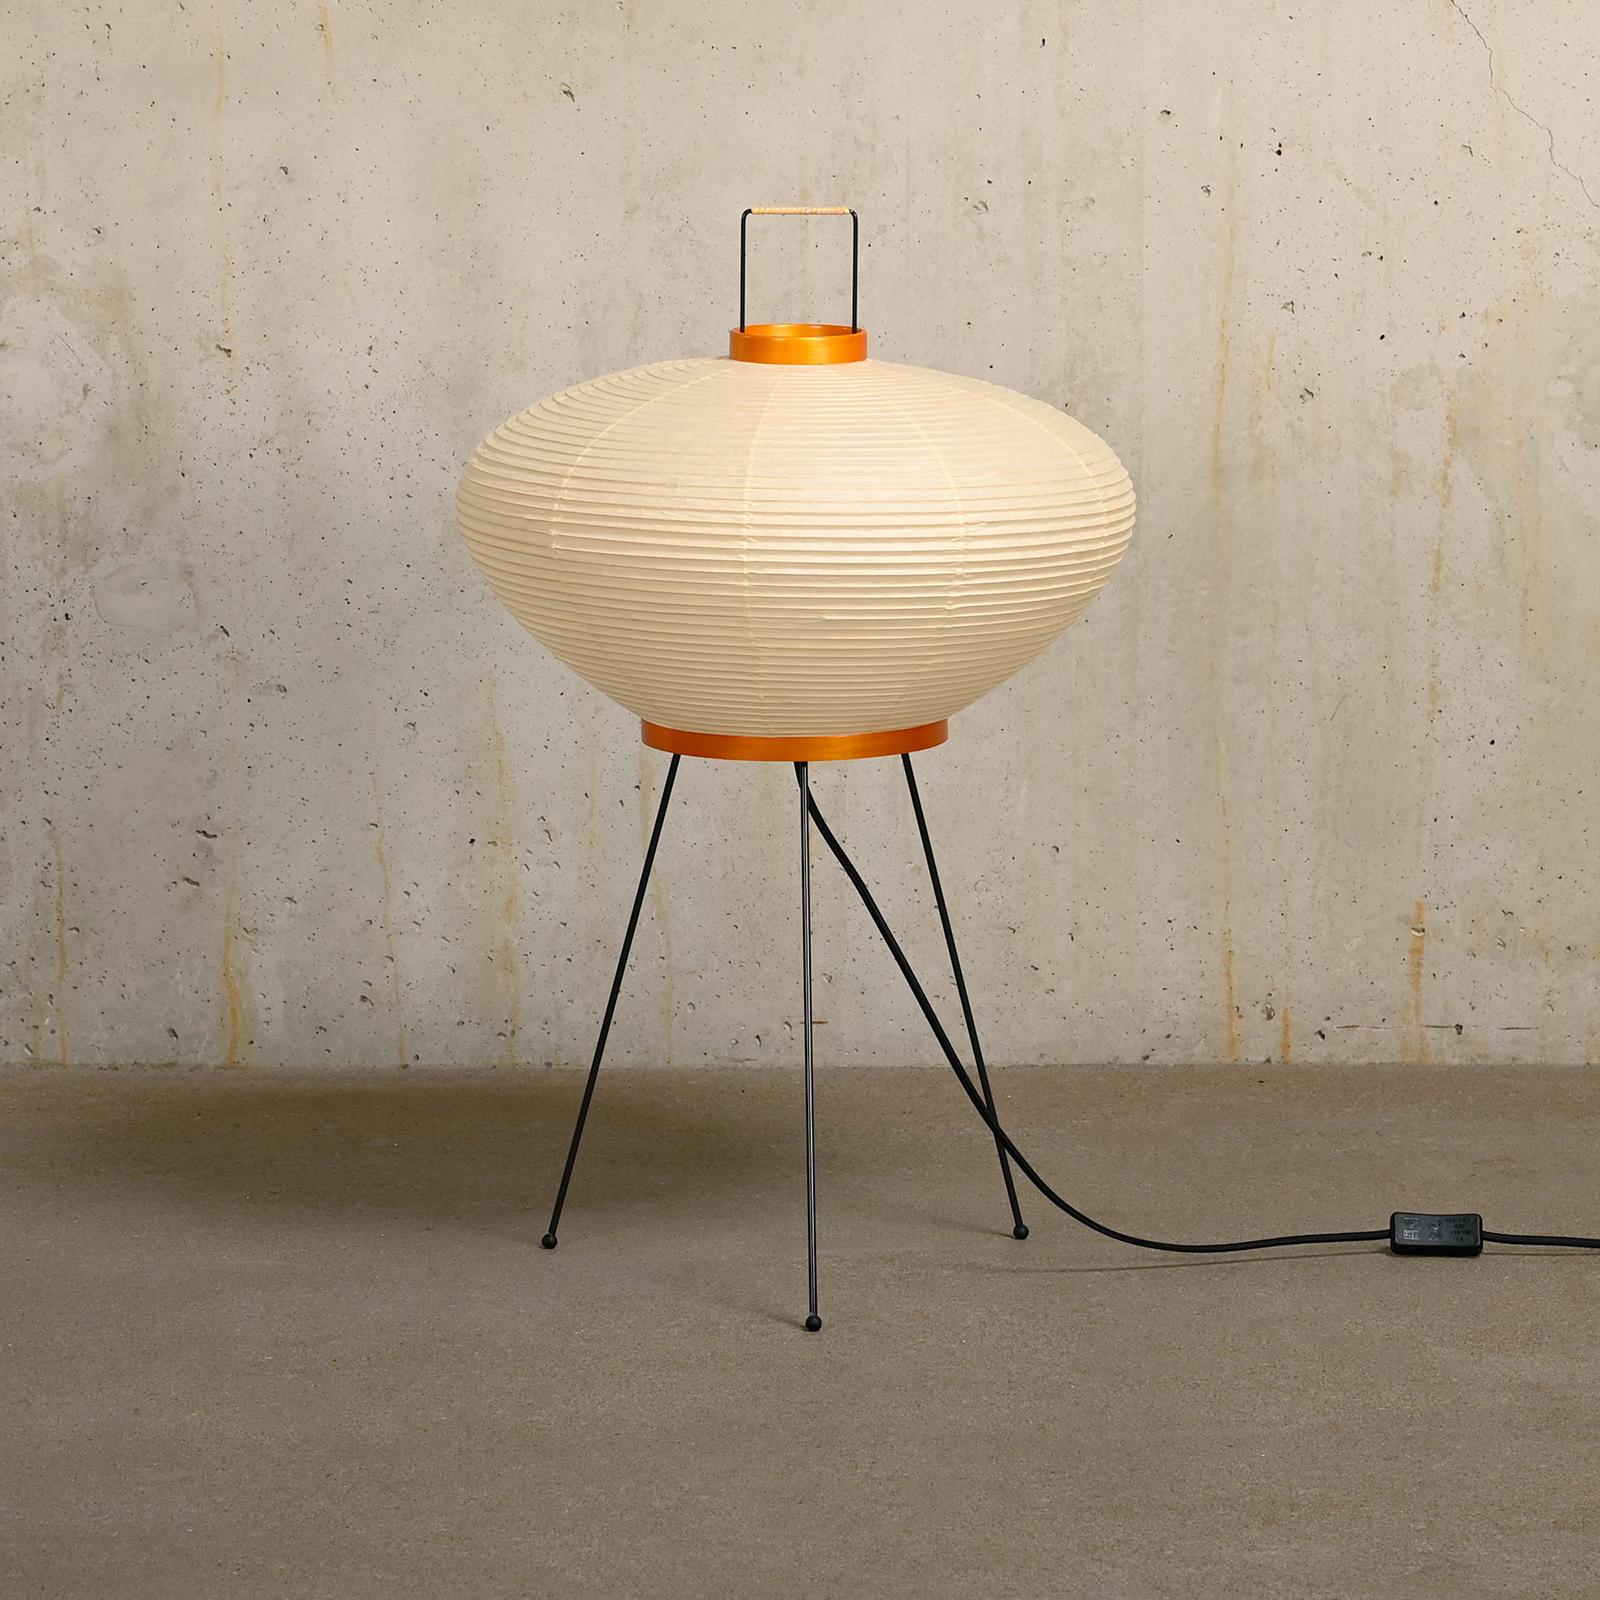 Iconic Akari light sculpture known as Model 9A designed by Isamu Noguchi and handcrafted from traditional washi paper and bamboo. Each Akari lamp shade is meticulously crafted by hand in the Ozeki workshop, a traditional family-owned company, based